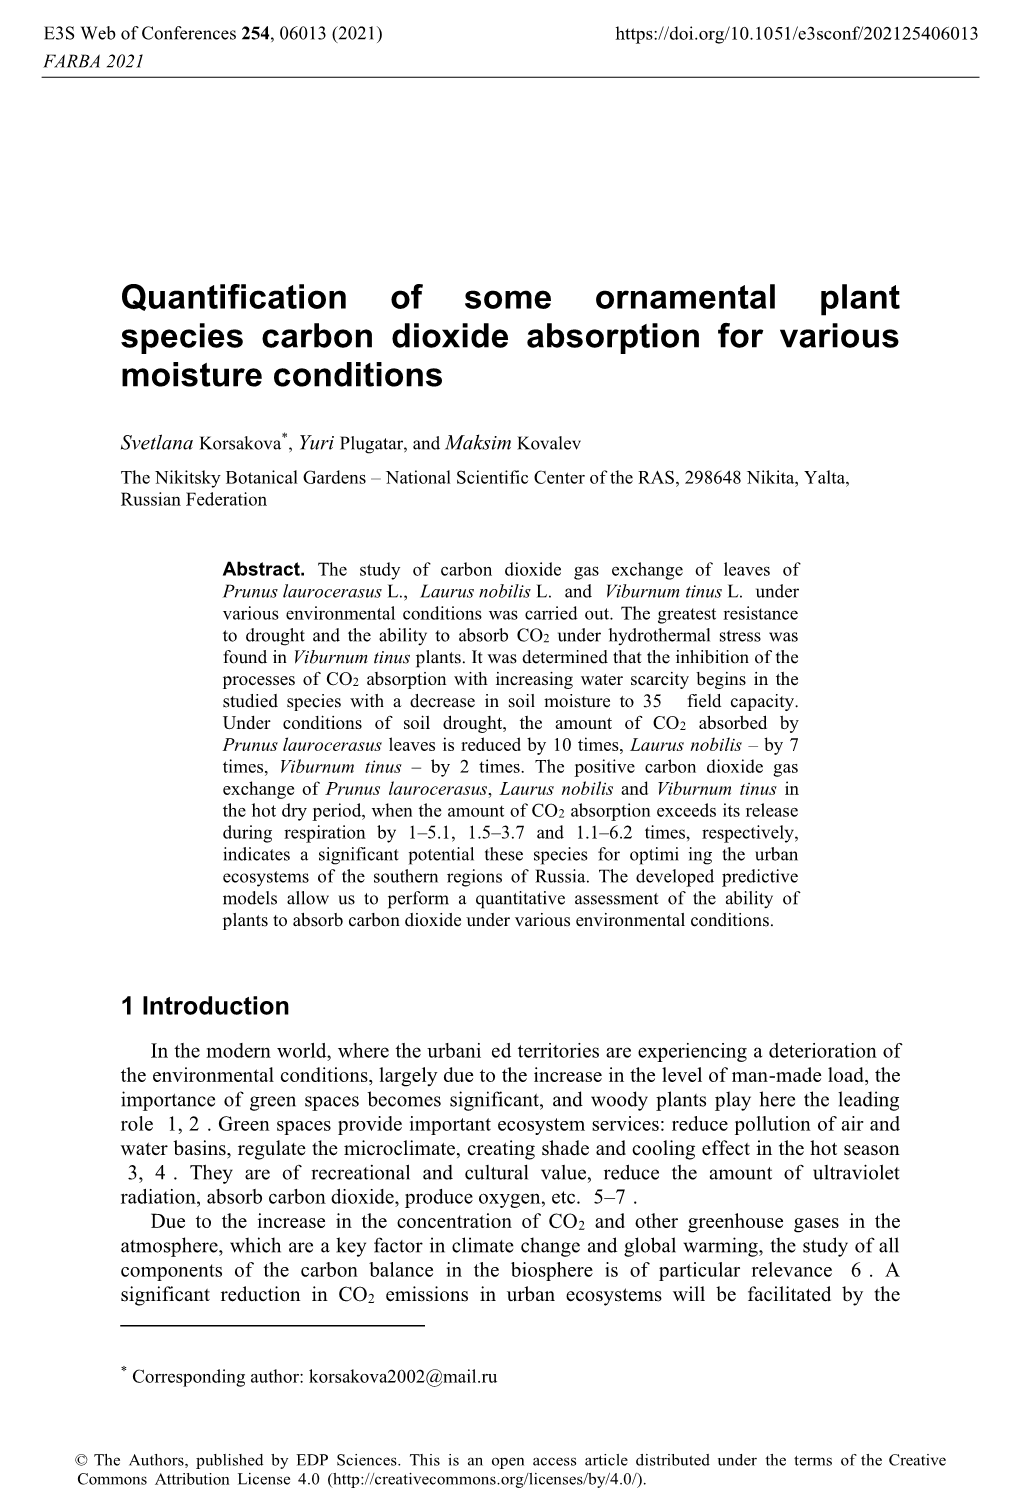 Quantification of Some Ornamental Plant Species Carbon Dioxide Absorption for Various Moisture Conditions